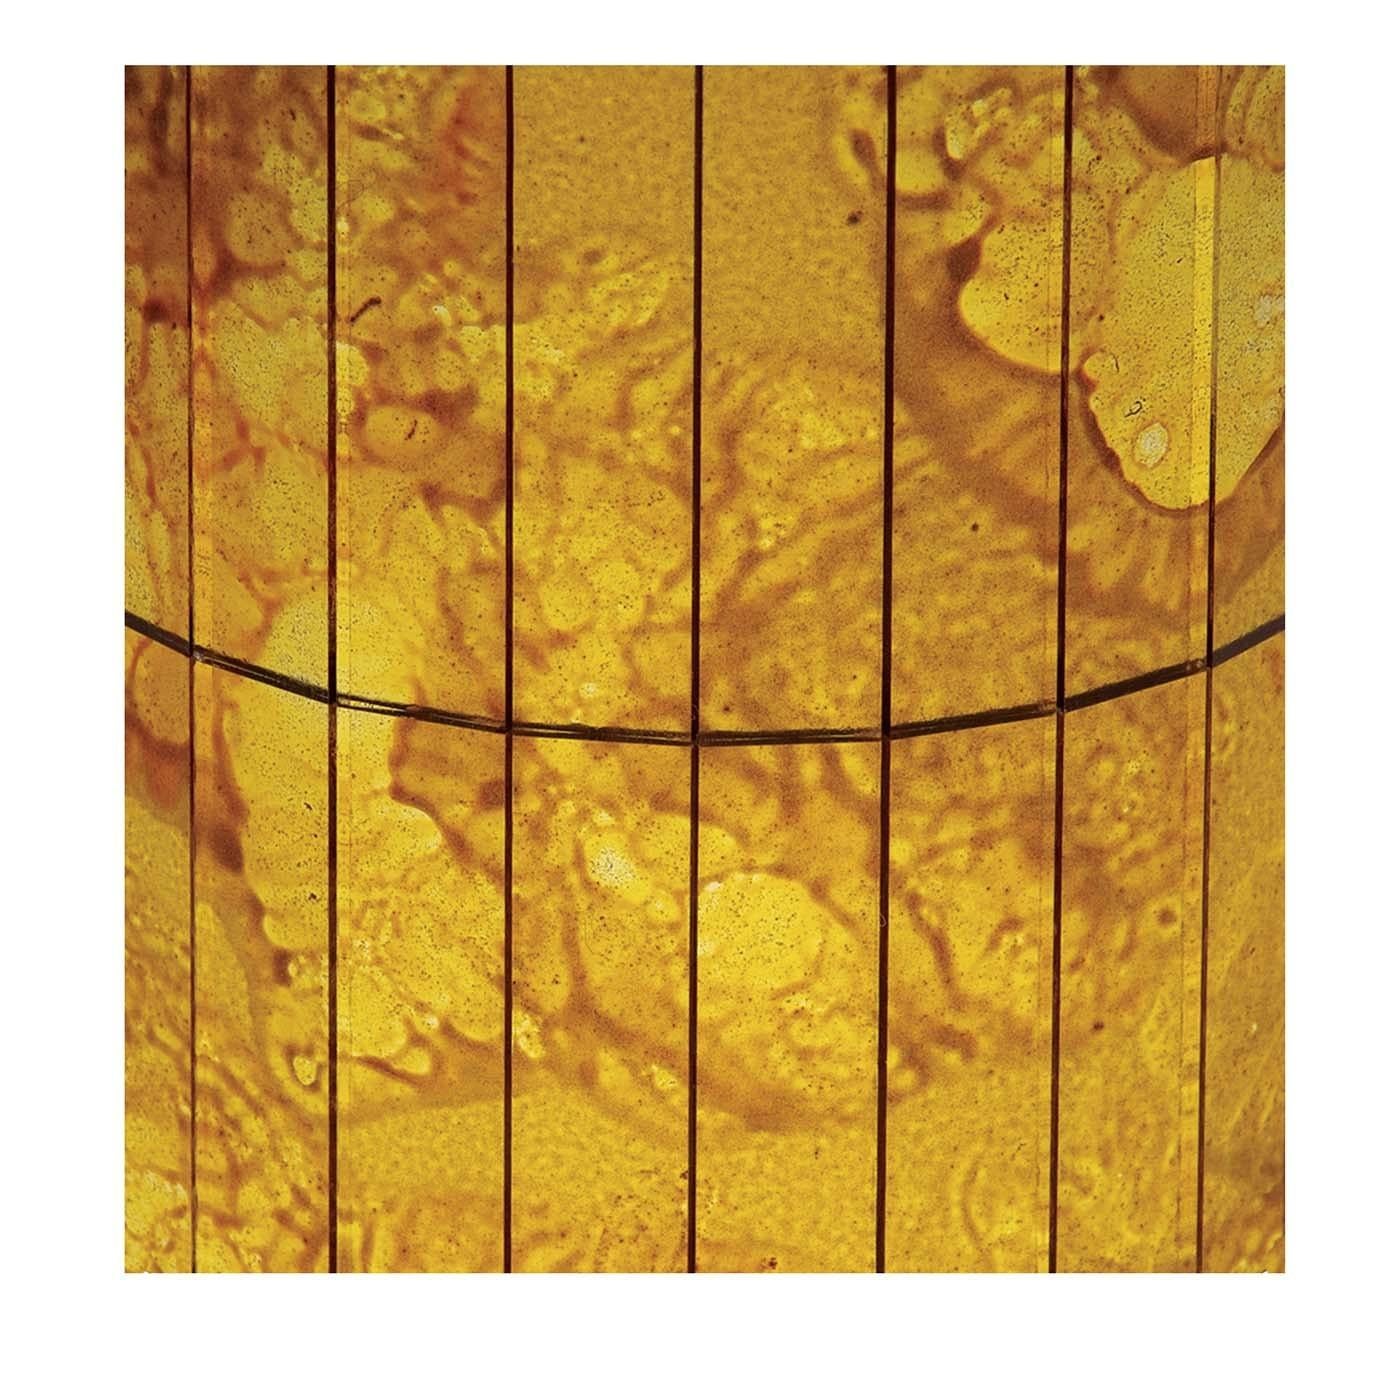 The bright, billowing shades of yellow and gold make for a luminous result on these canvased mosaic glass panels by Antique Mirror. This luminous decoration will add an ambiance of earthly mystery as well as elegant brilliance to any modern or